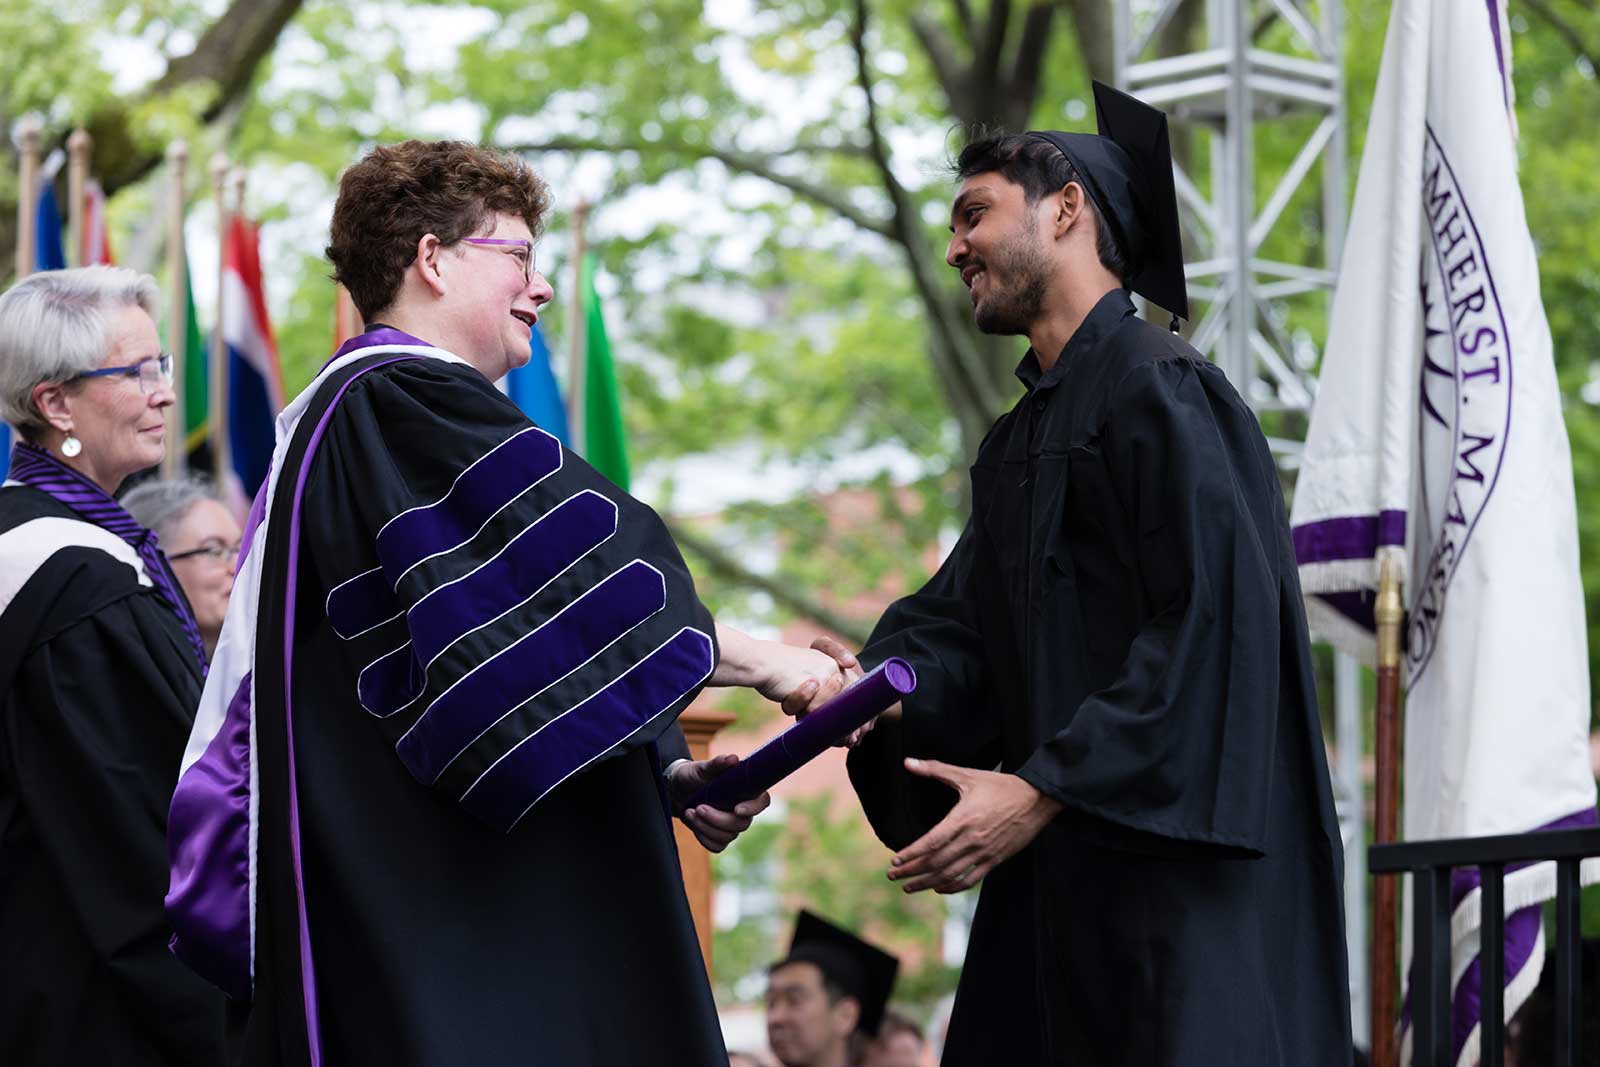 President Martin shaking hands with a graduate